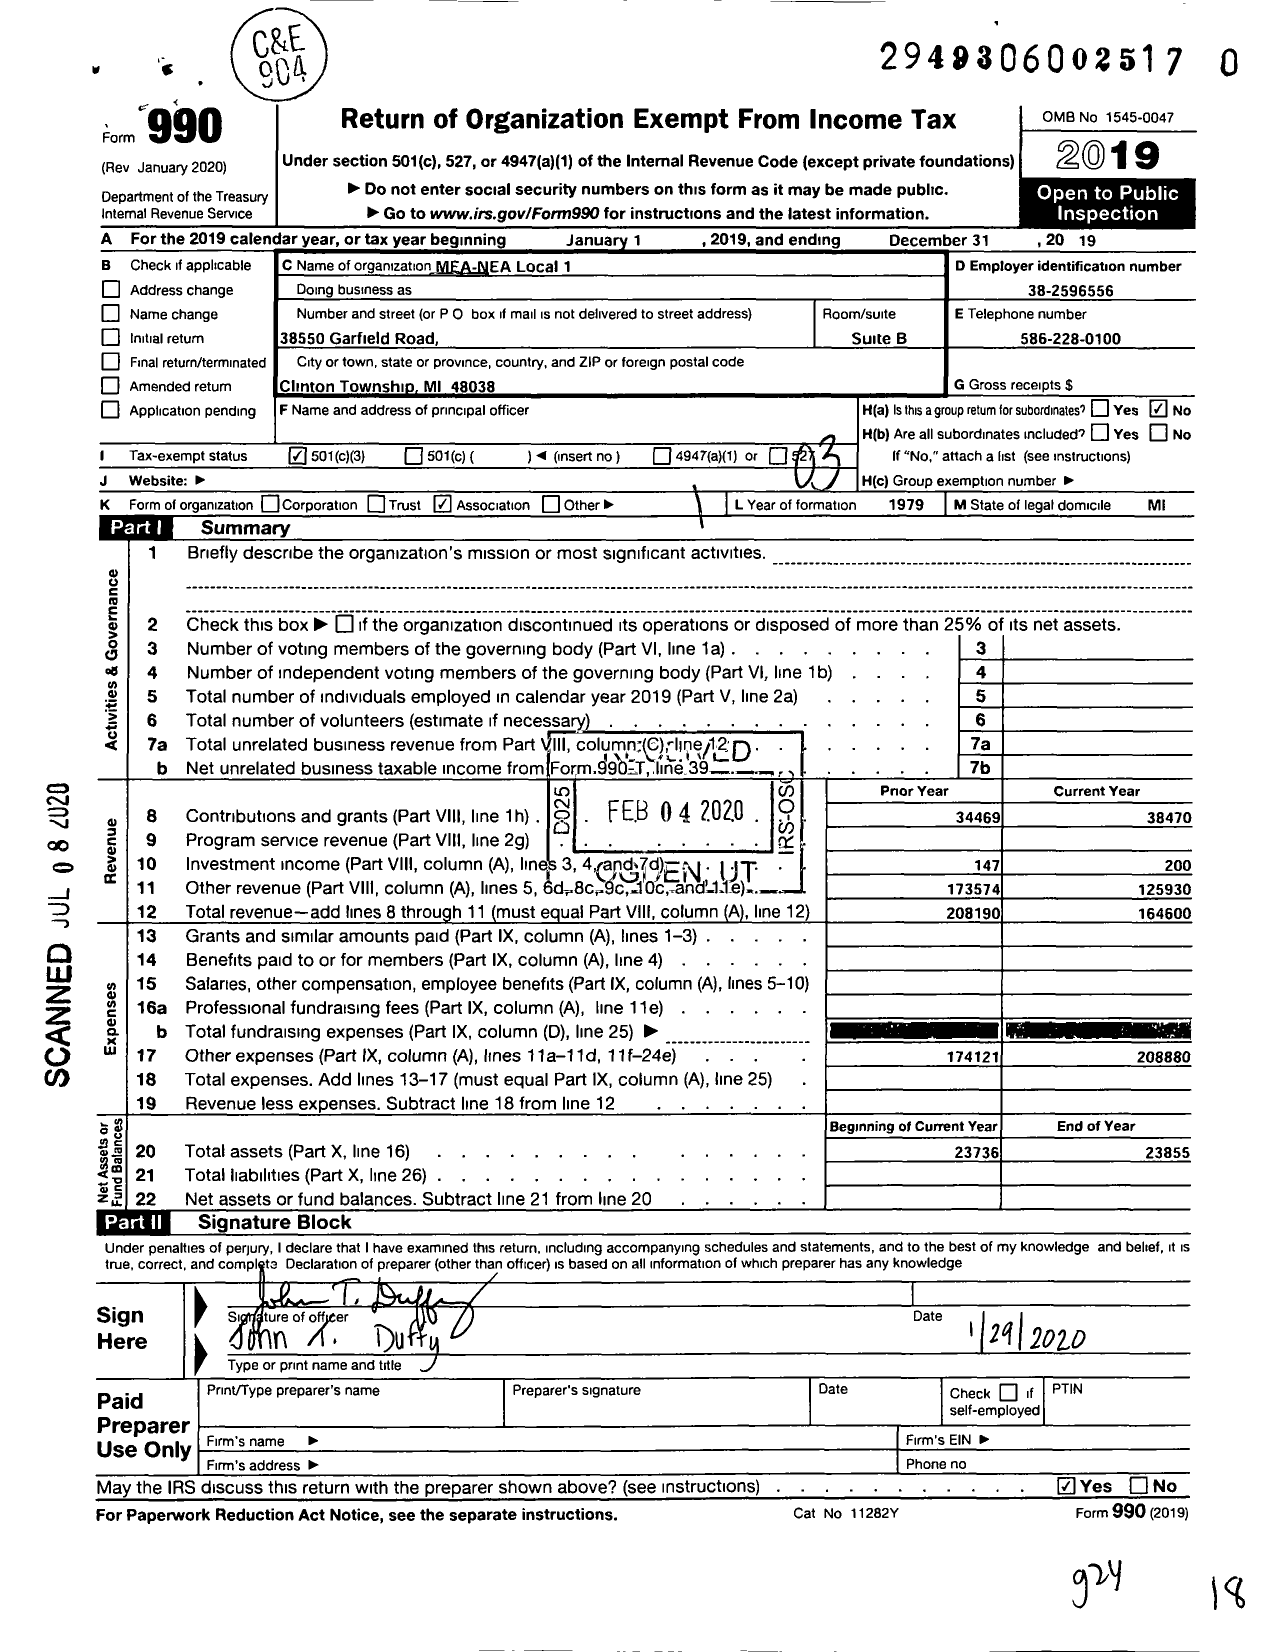 Image of first page of 2019 Form 990 for MEA-NEA Local 1